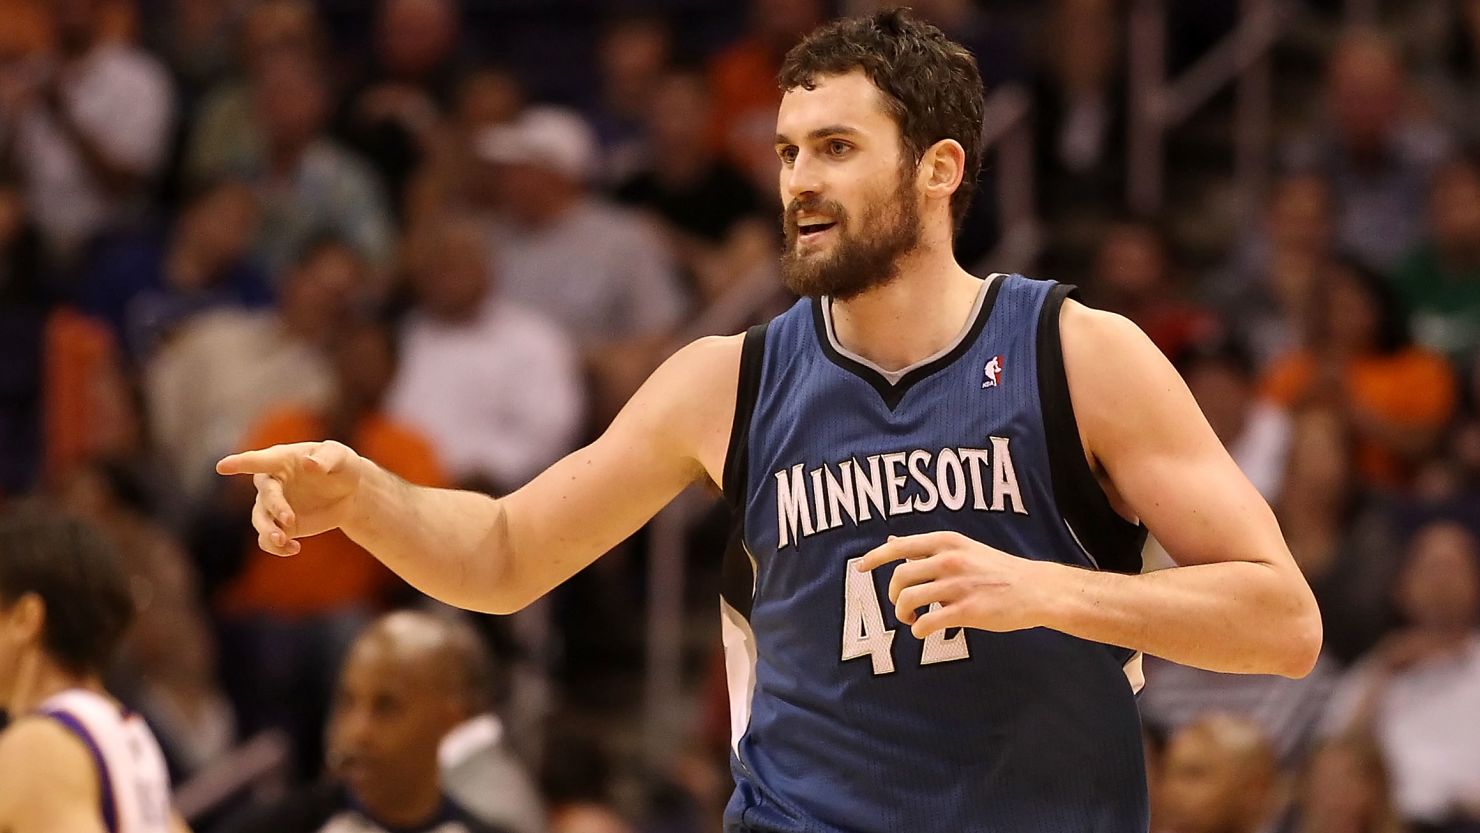 Kevin Love averaged 19.2 points and 12.2 rebounds a game with the Minnesota Timberwolves.